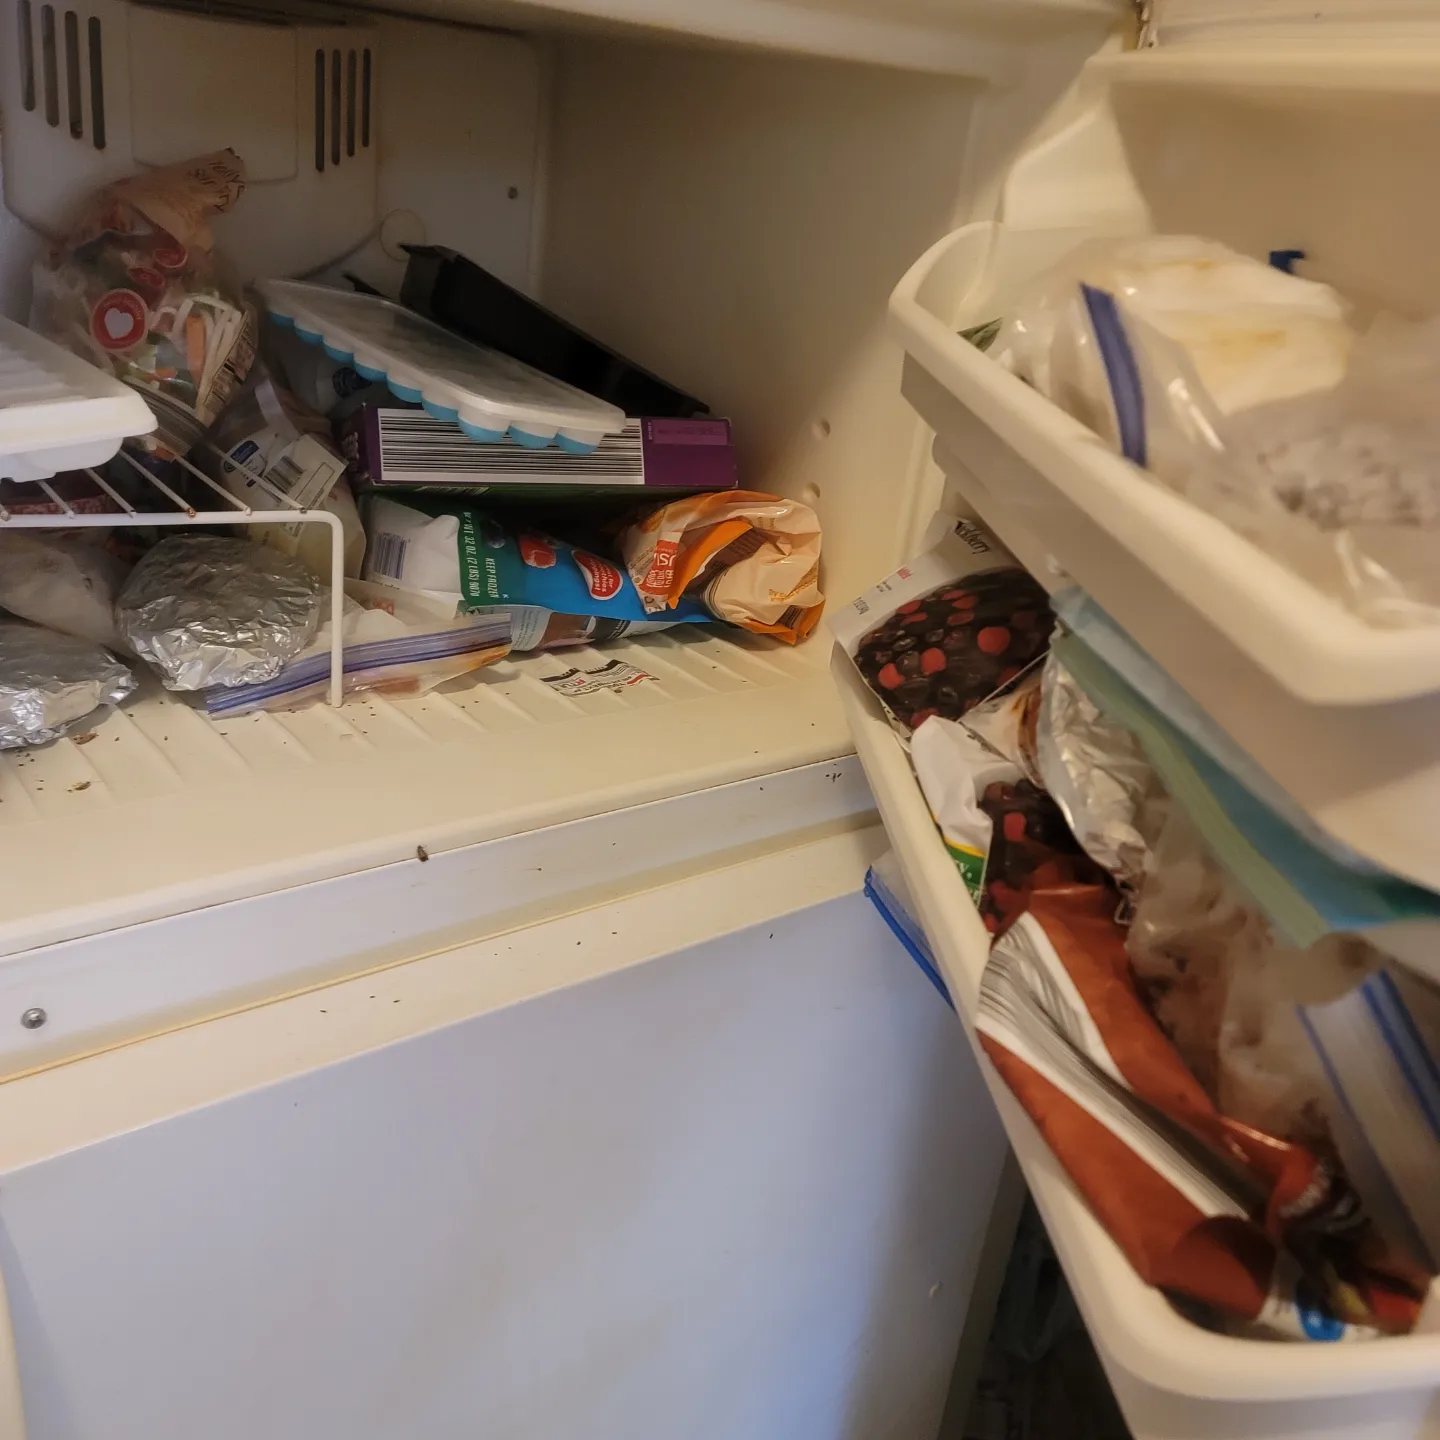 Used frozen items stored in a fridge